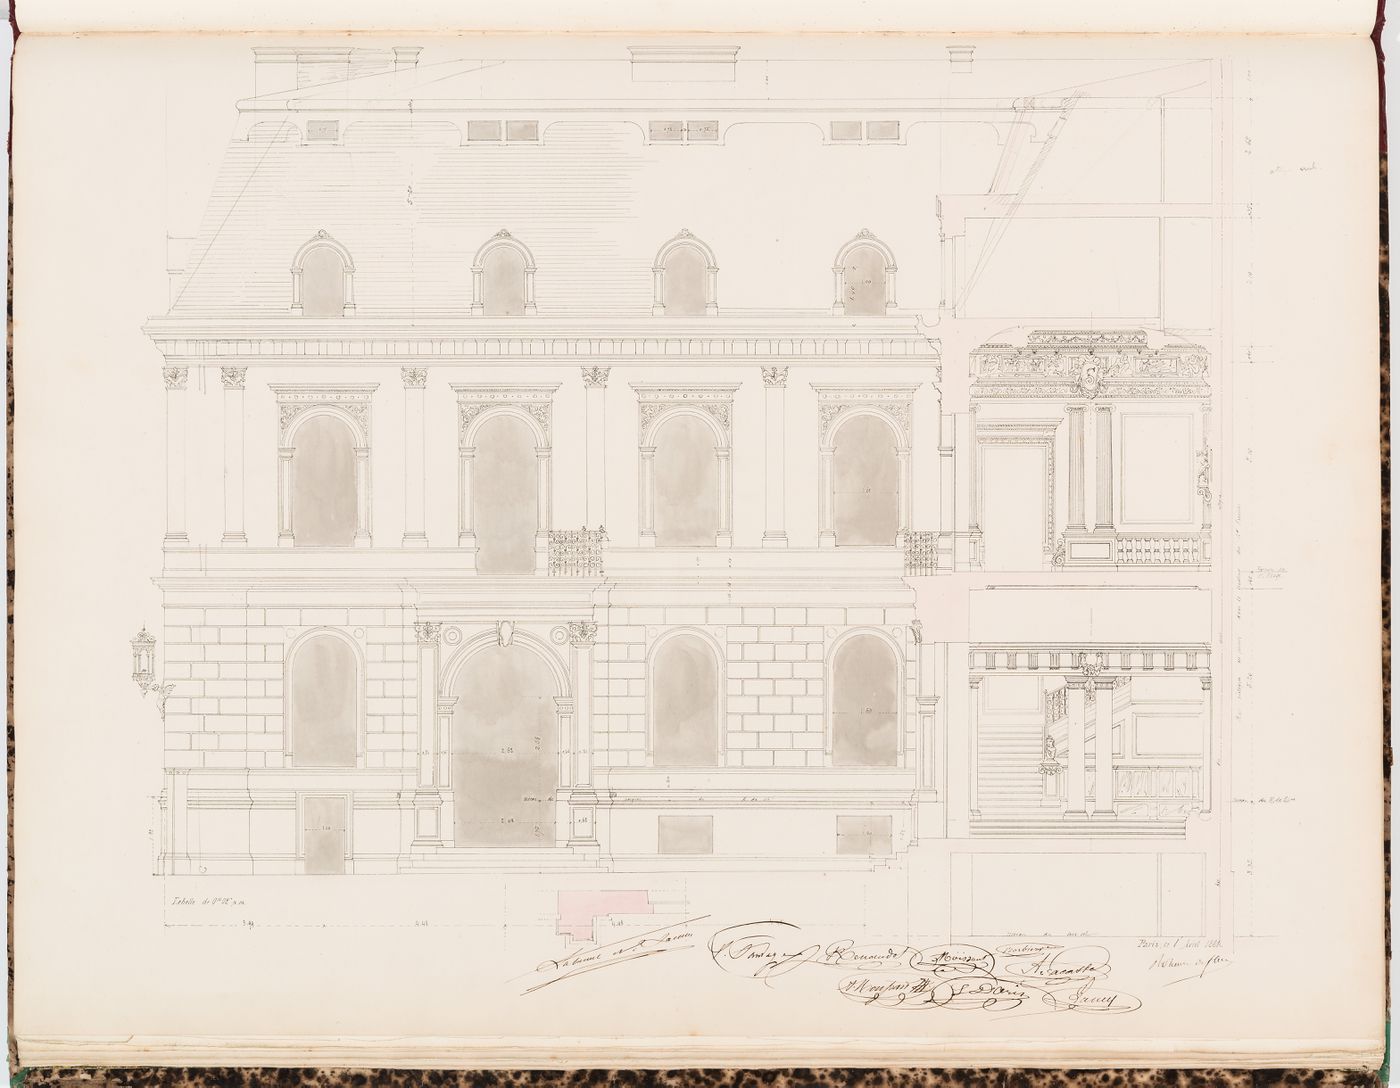 Sectional elevation through the entrance pavilion and the "cours d'honneur", showing the courtyard façade of the "pavillon sud" including a plan for a door jamb, Hôtel Sauvage, Paris